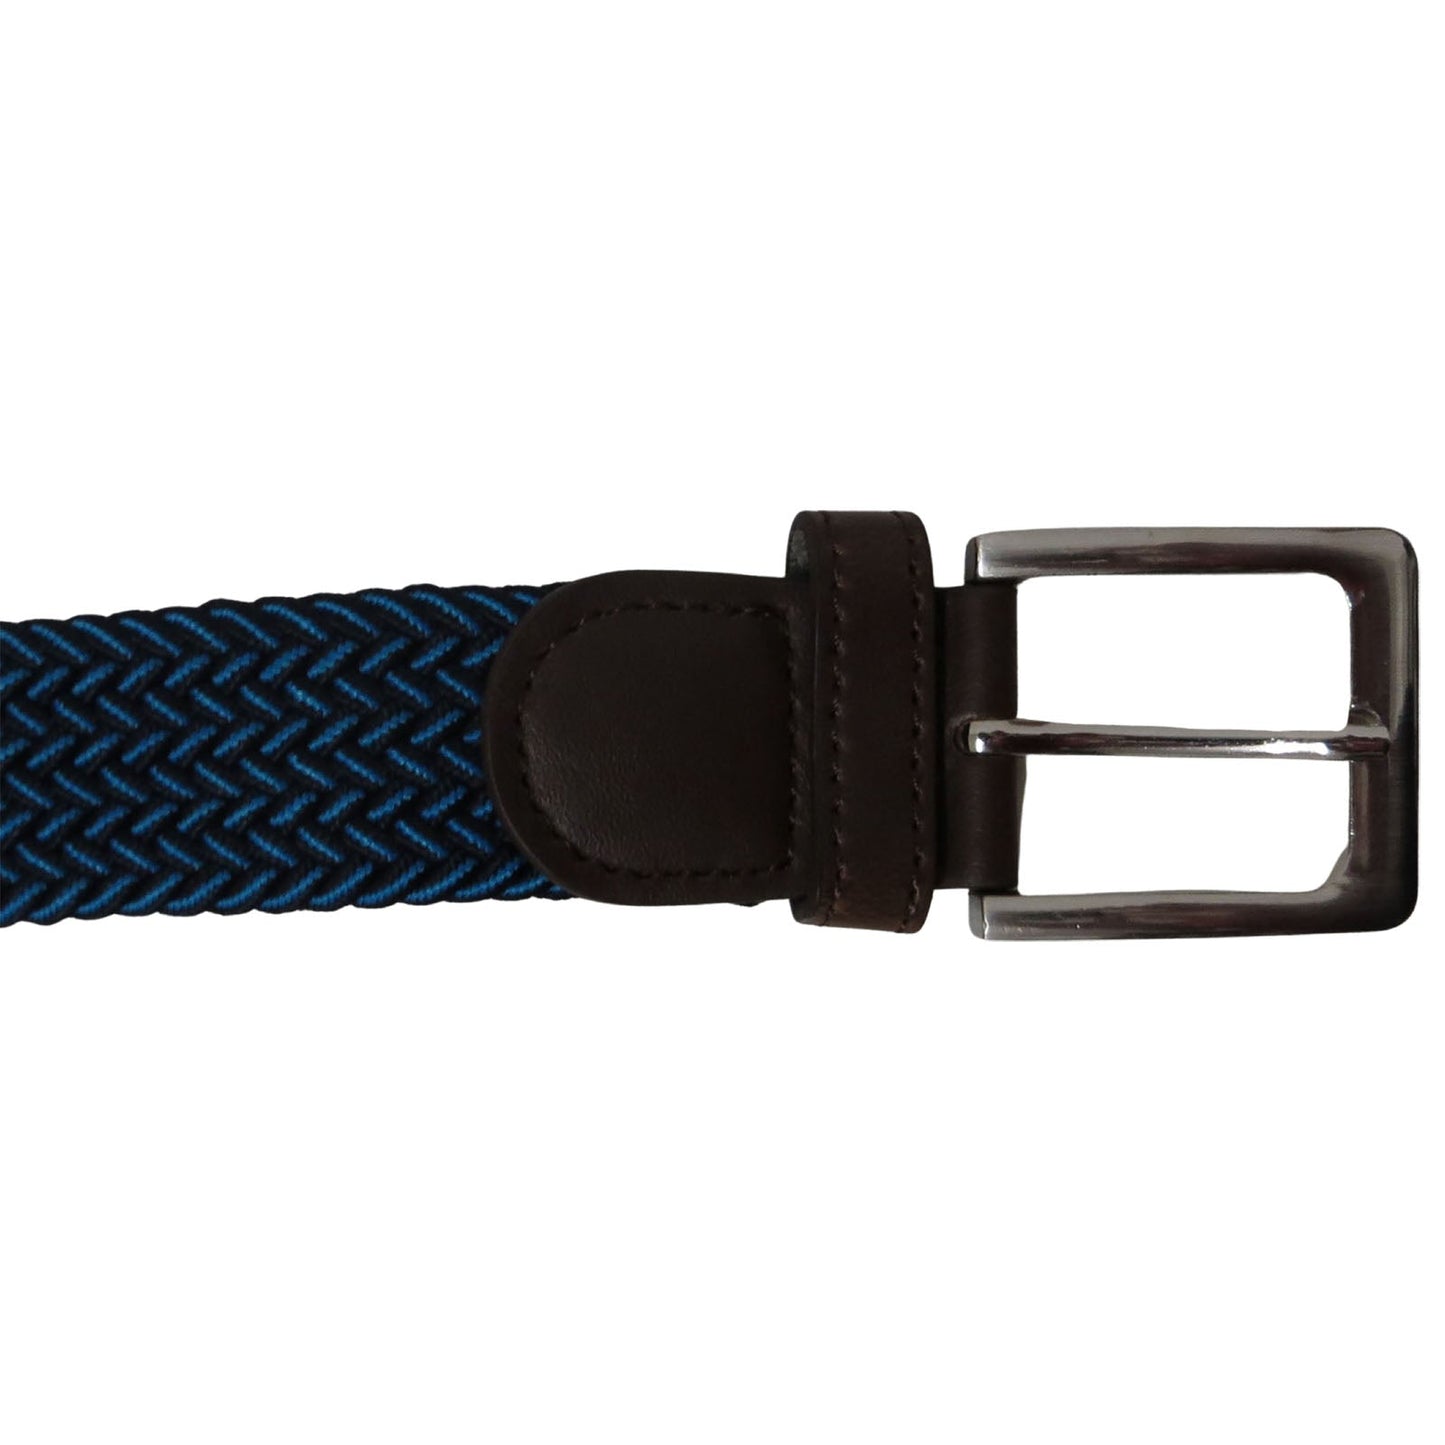 wholesale elastic stretch belt in a braided woven blue and black multicolor casual wear